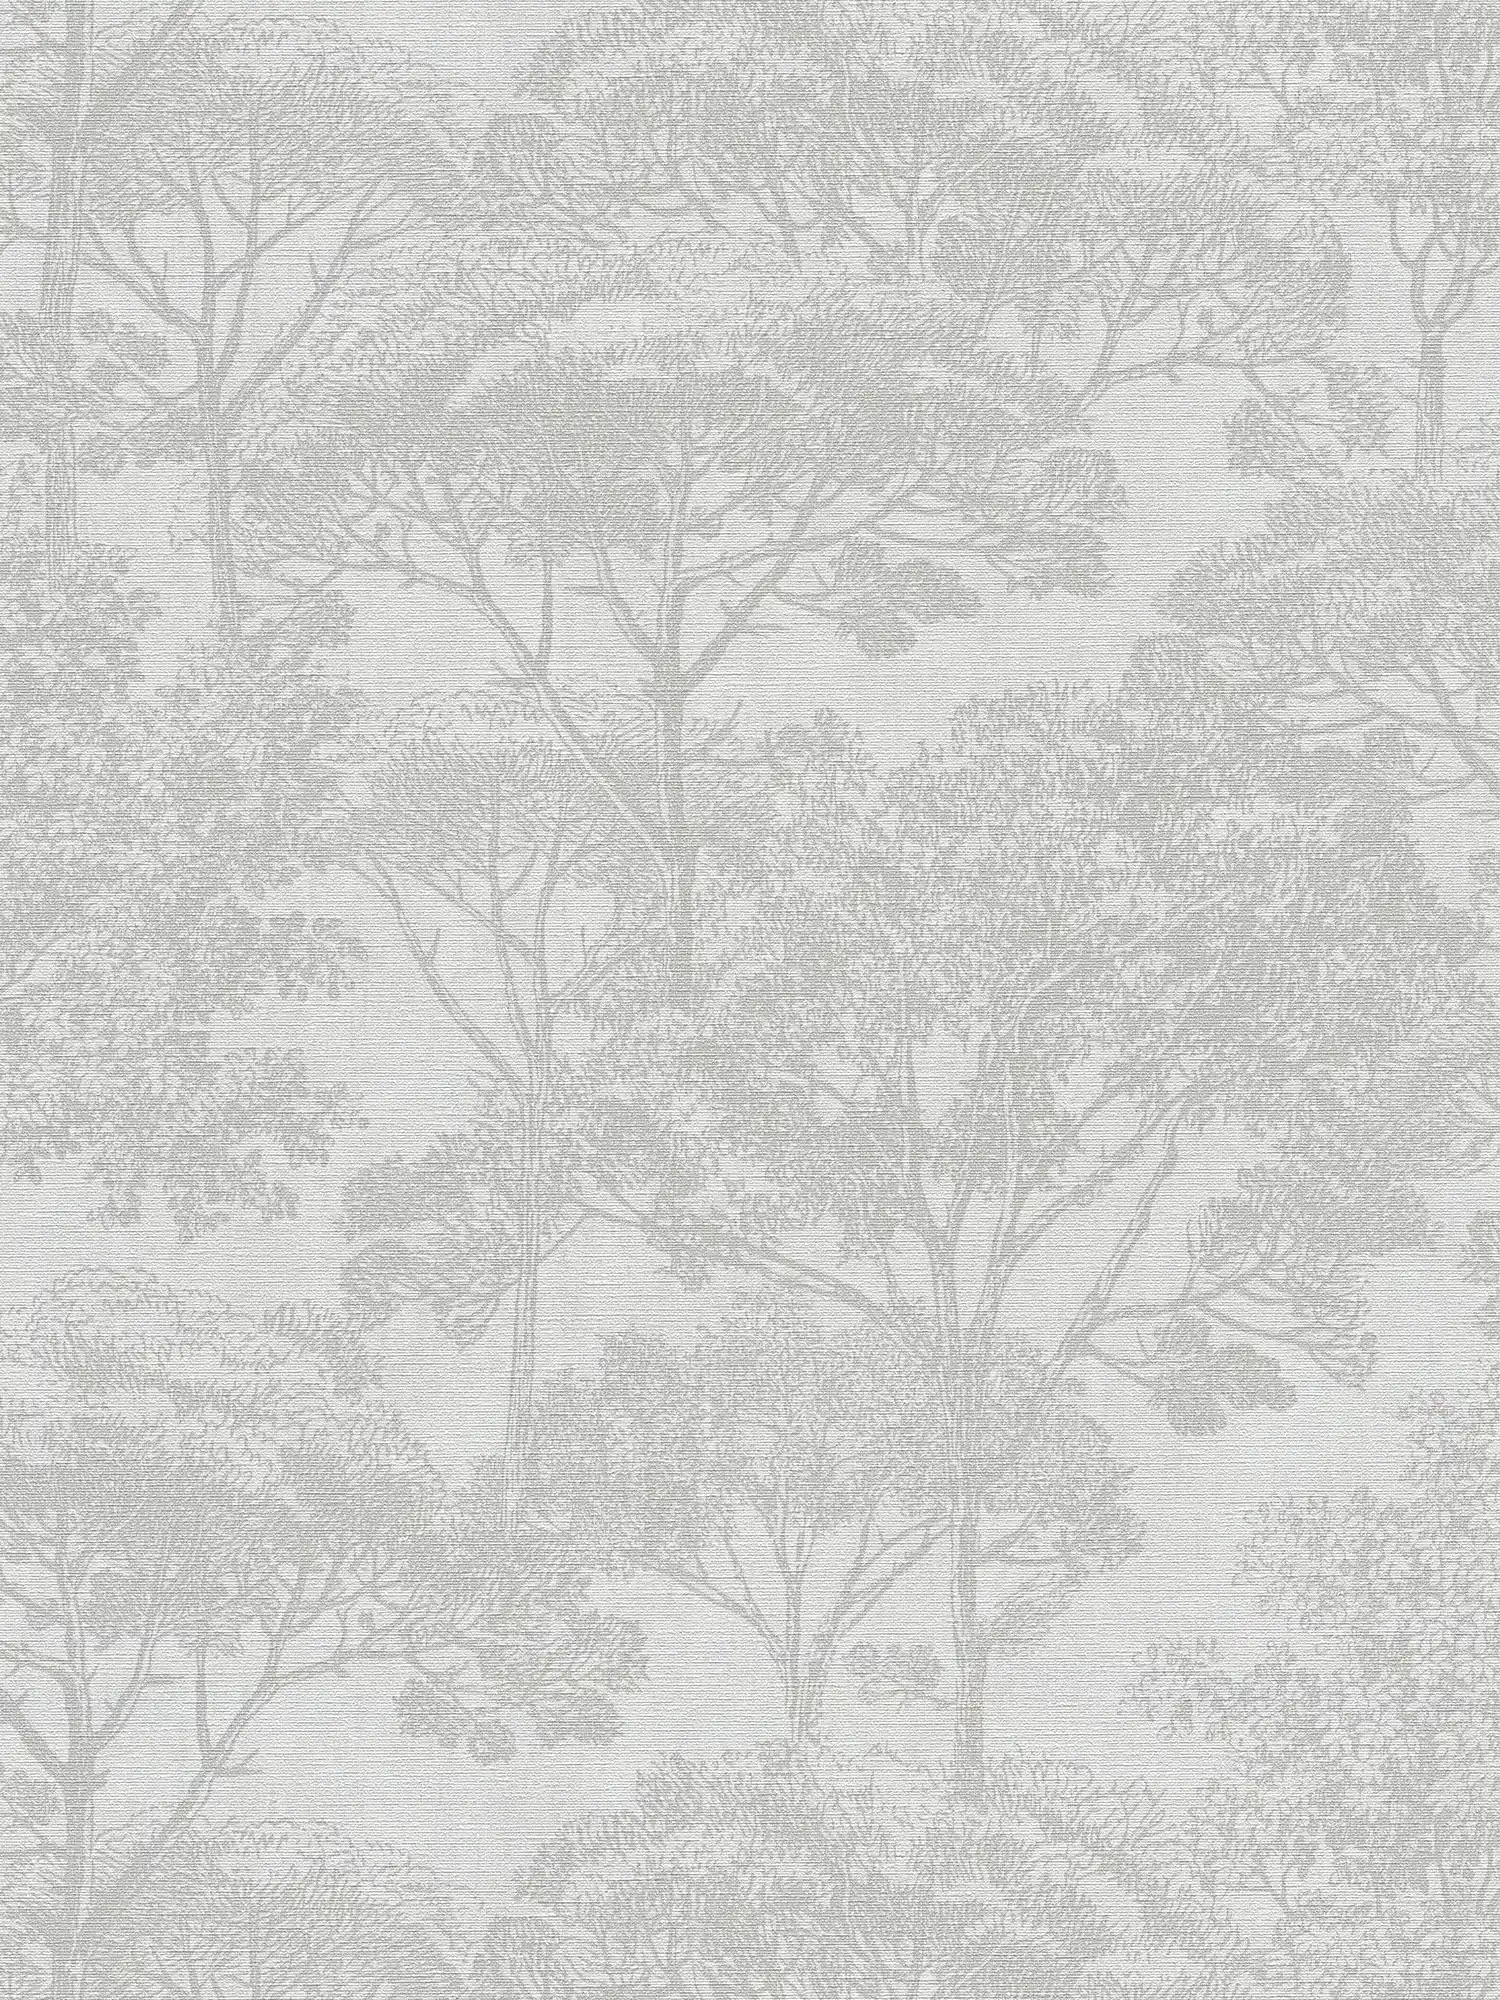 Wallpaper vintage natural pattern trees with linen look - beige, cream
